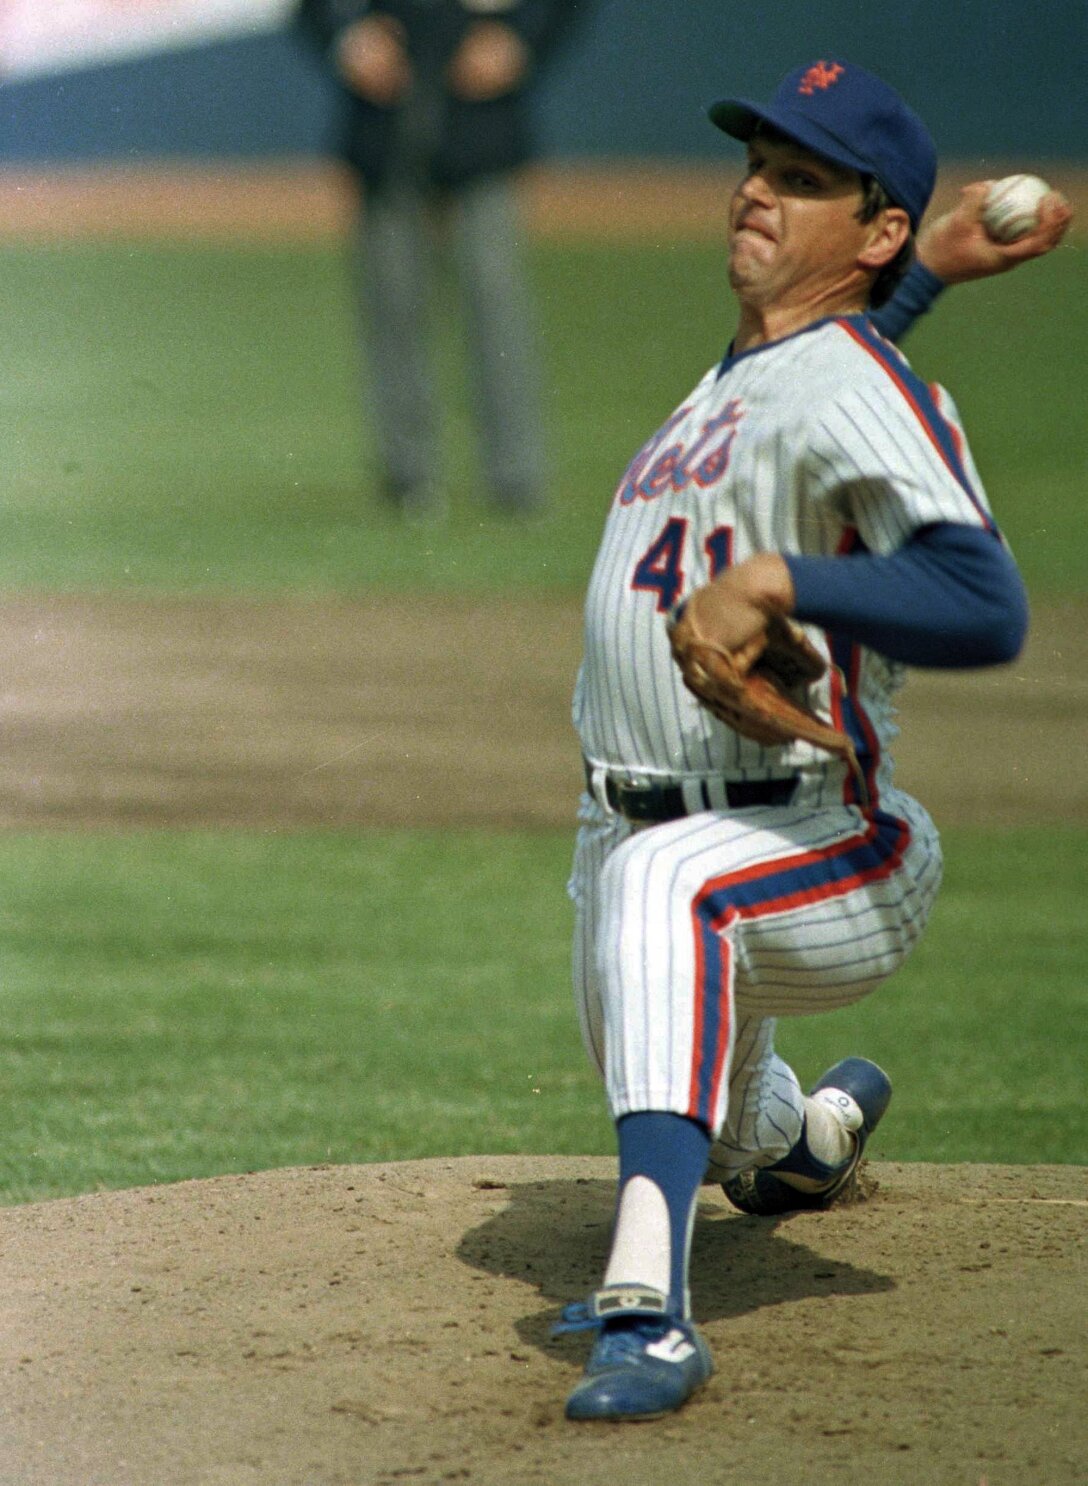 Hall of Fame pitcher Tom Seaver diagnosed with dementia at 74